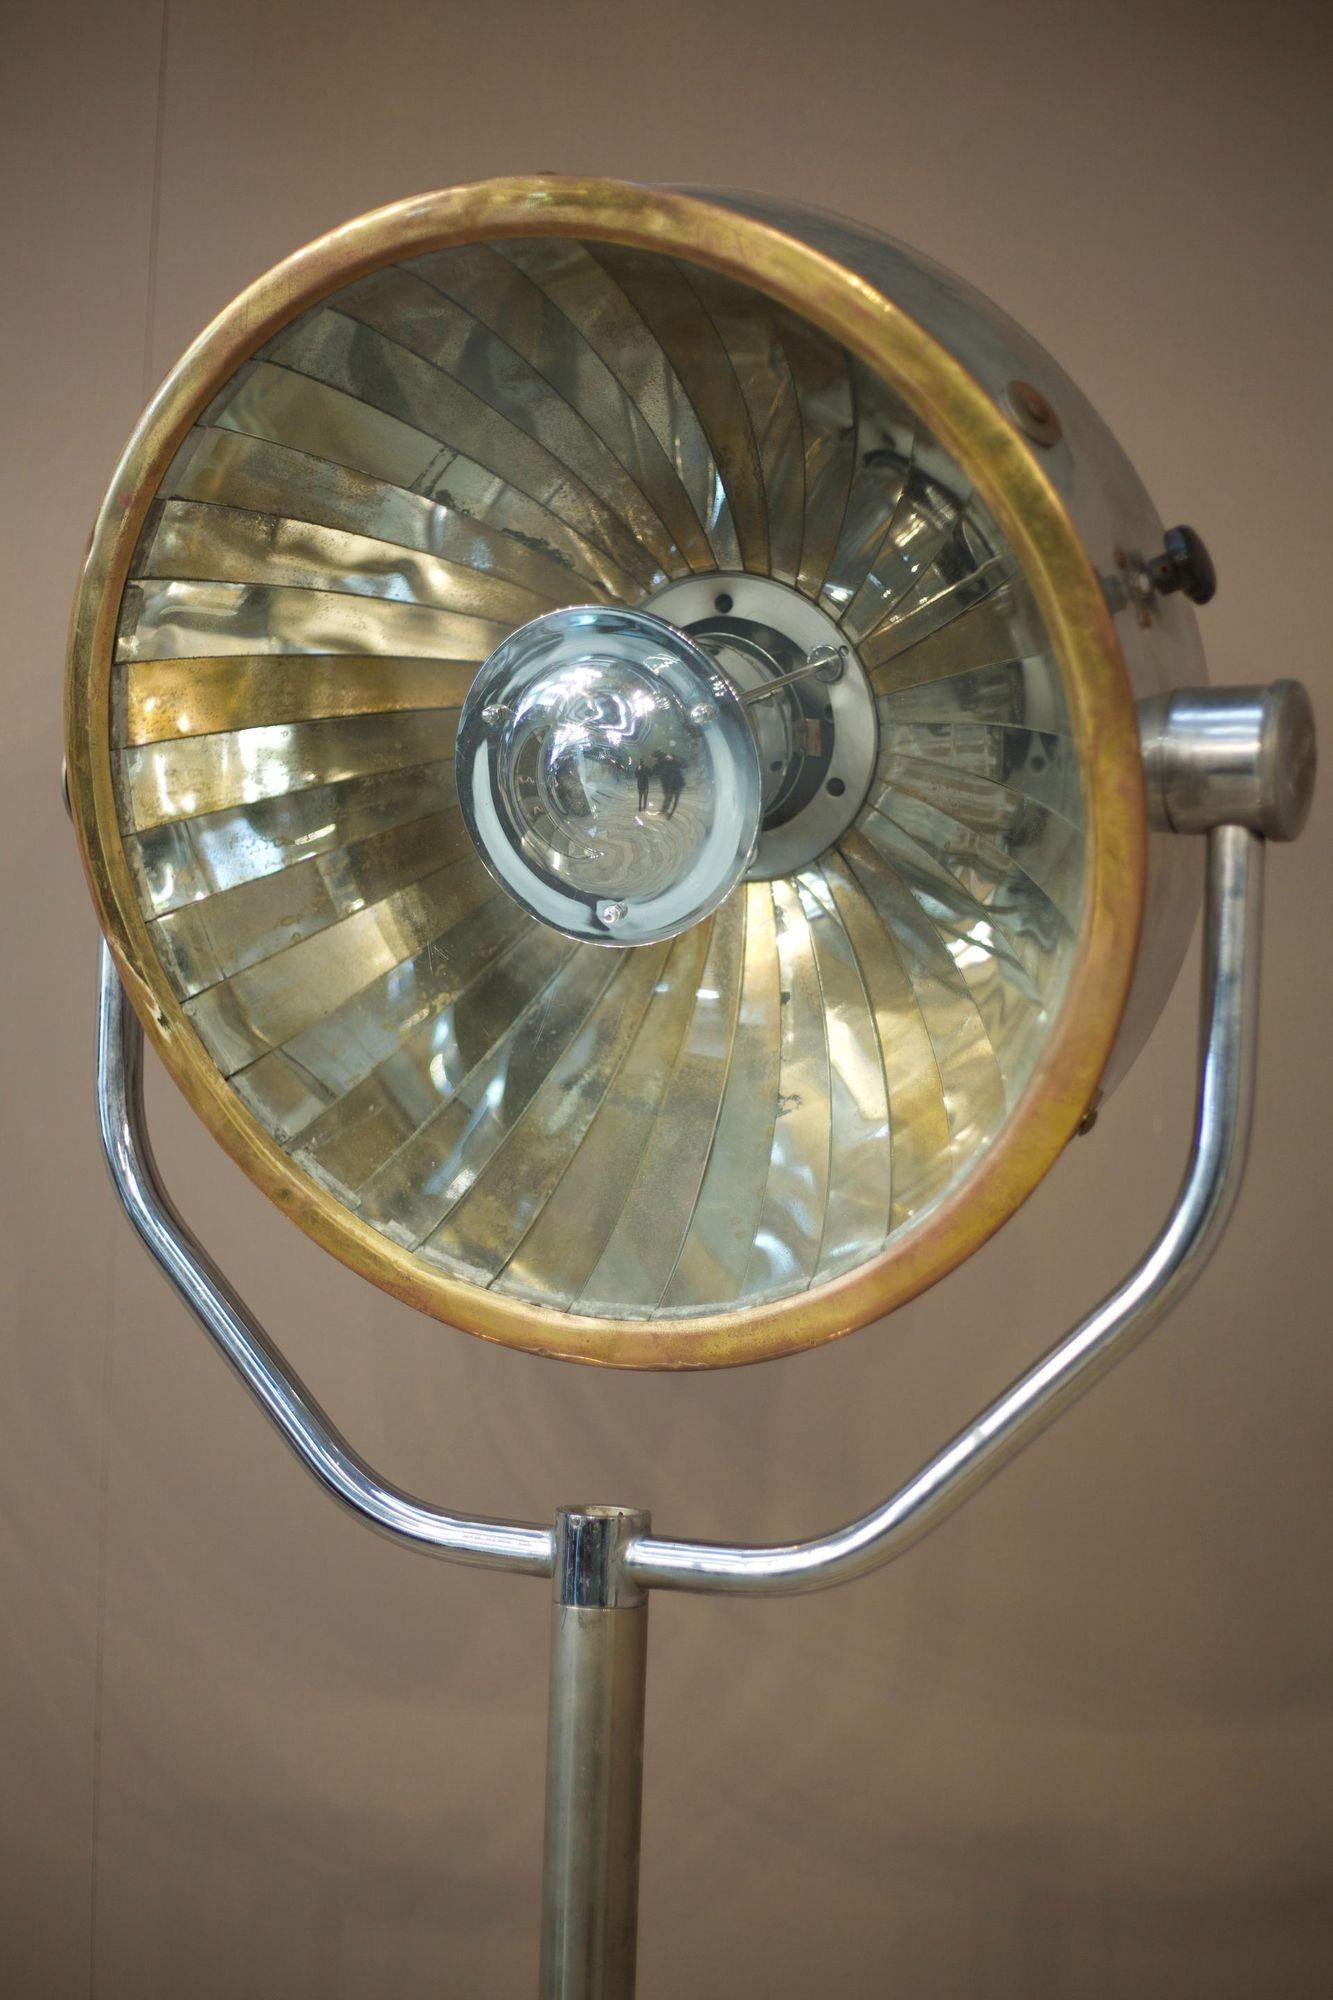 This is a spectacular 20th century chrome floor lamp. Originally I believe this to have been a medial light as the segmented mirror plates in the light itself cast a very attractive directional light. The brass rim around the light give this a very